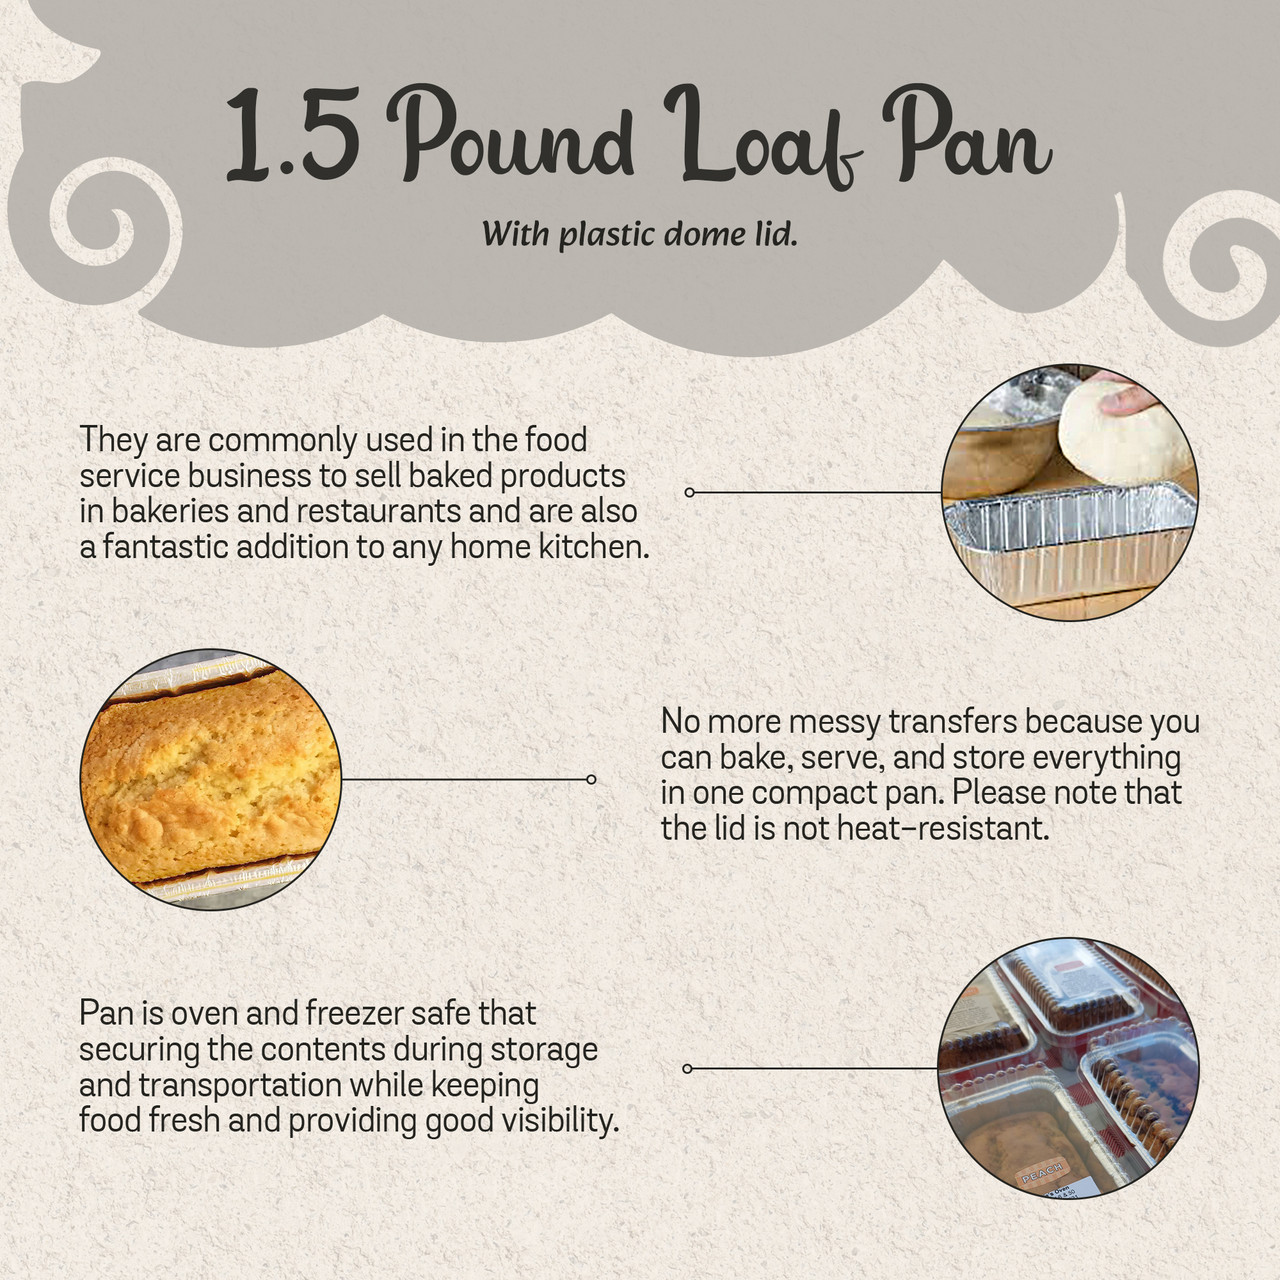 1½ lb. Foil Loaf Pan with Clear Dome Lid - Case of 500 - #208P